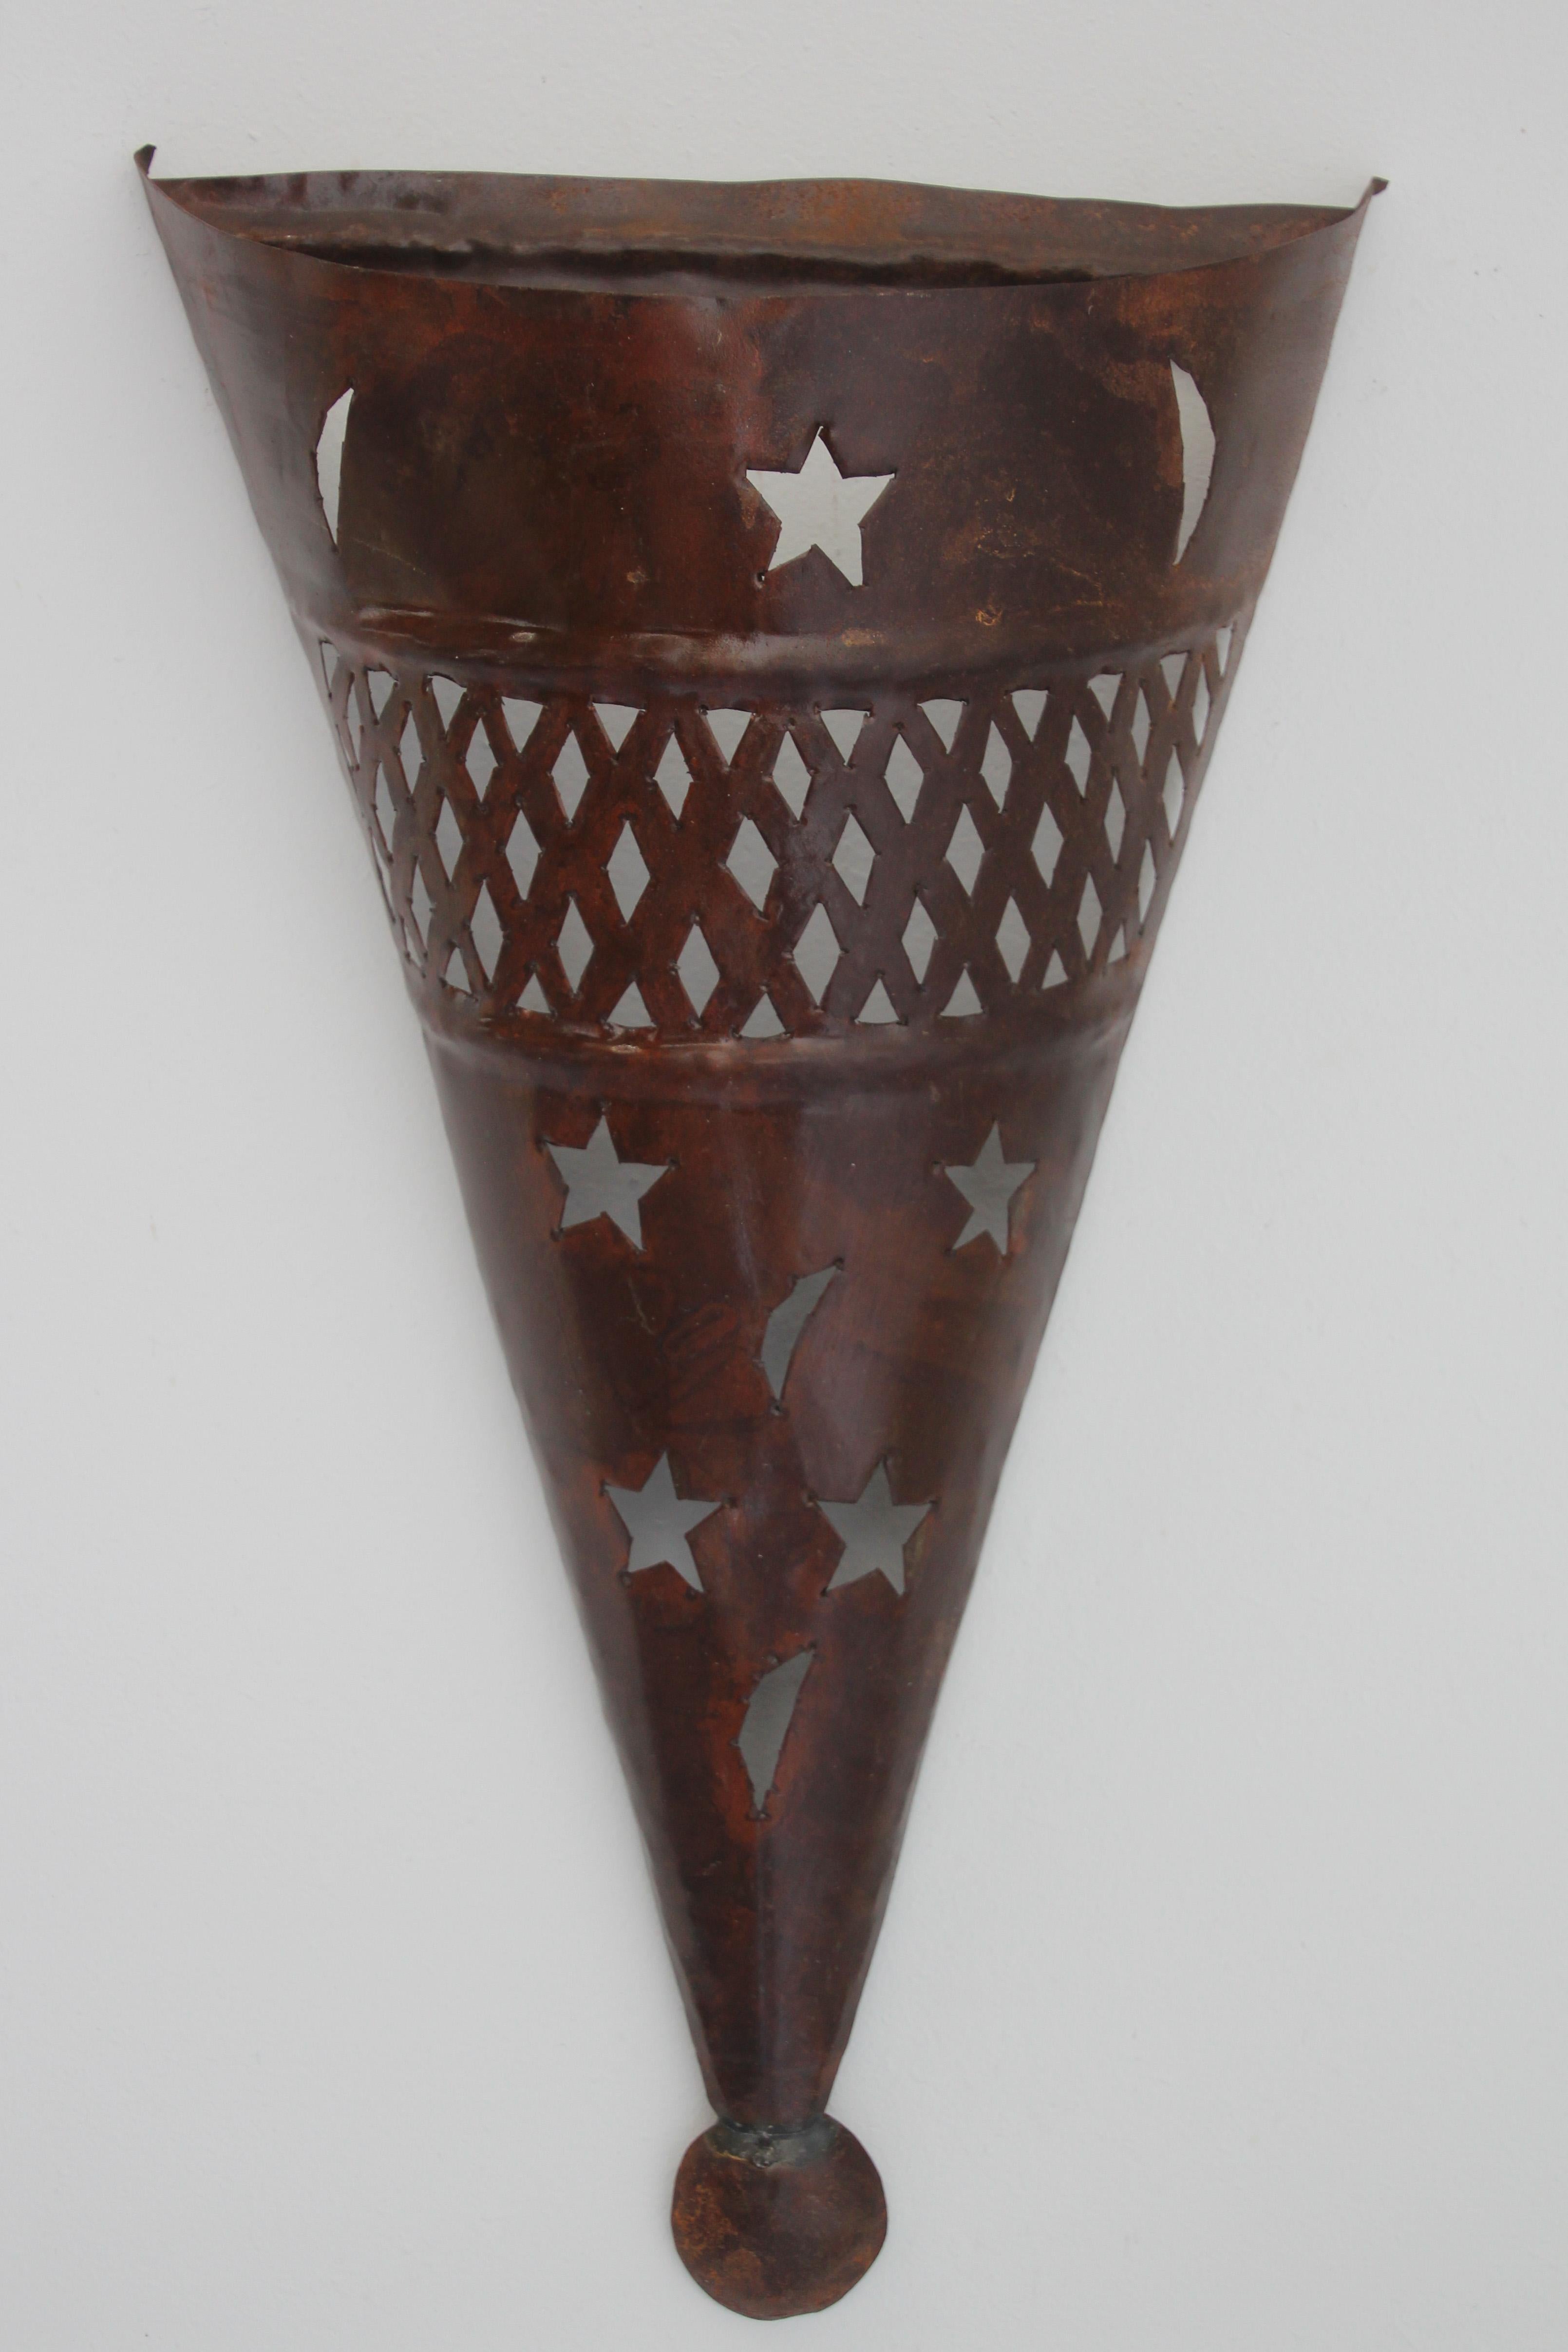 Handcrafted Moroccan Spanish style metal tole sconce shade in cone shape.
Hispano Moresque sconce shade with cutout stars and crescent moons.
Dark rust finish patina,
For use indoor or outdoor.
Not wired for electricity, shade only.
Multiple